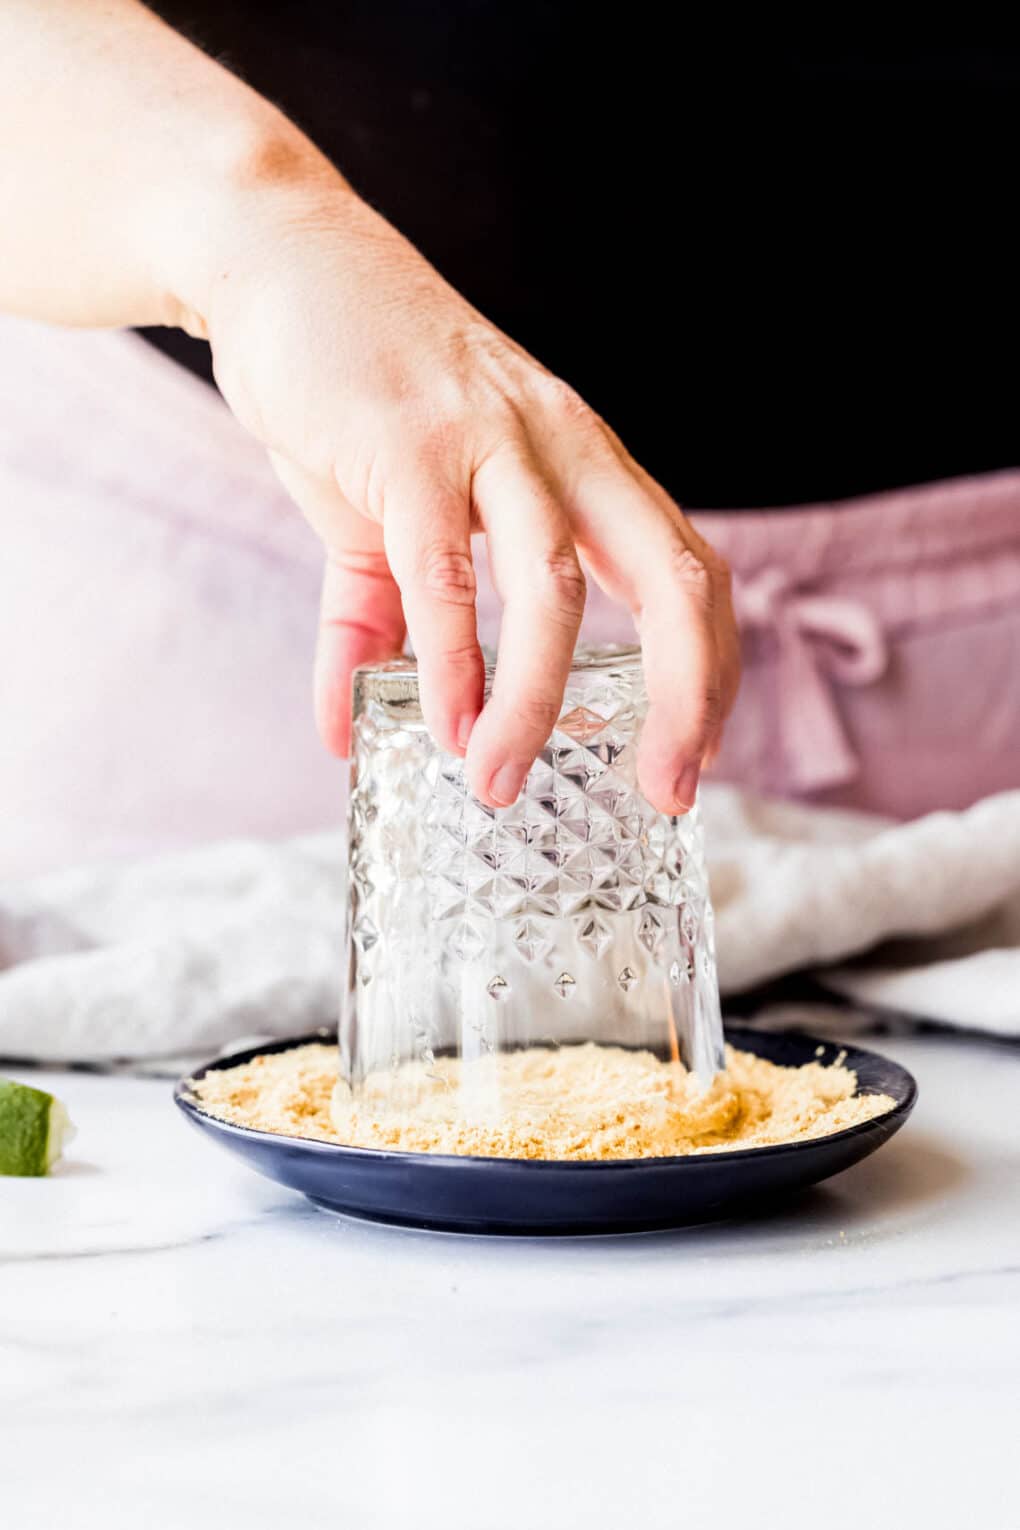 A woman dipping glass rim into graham cracker crumbs